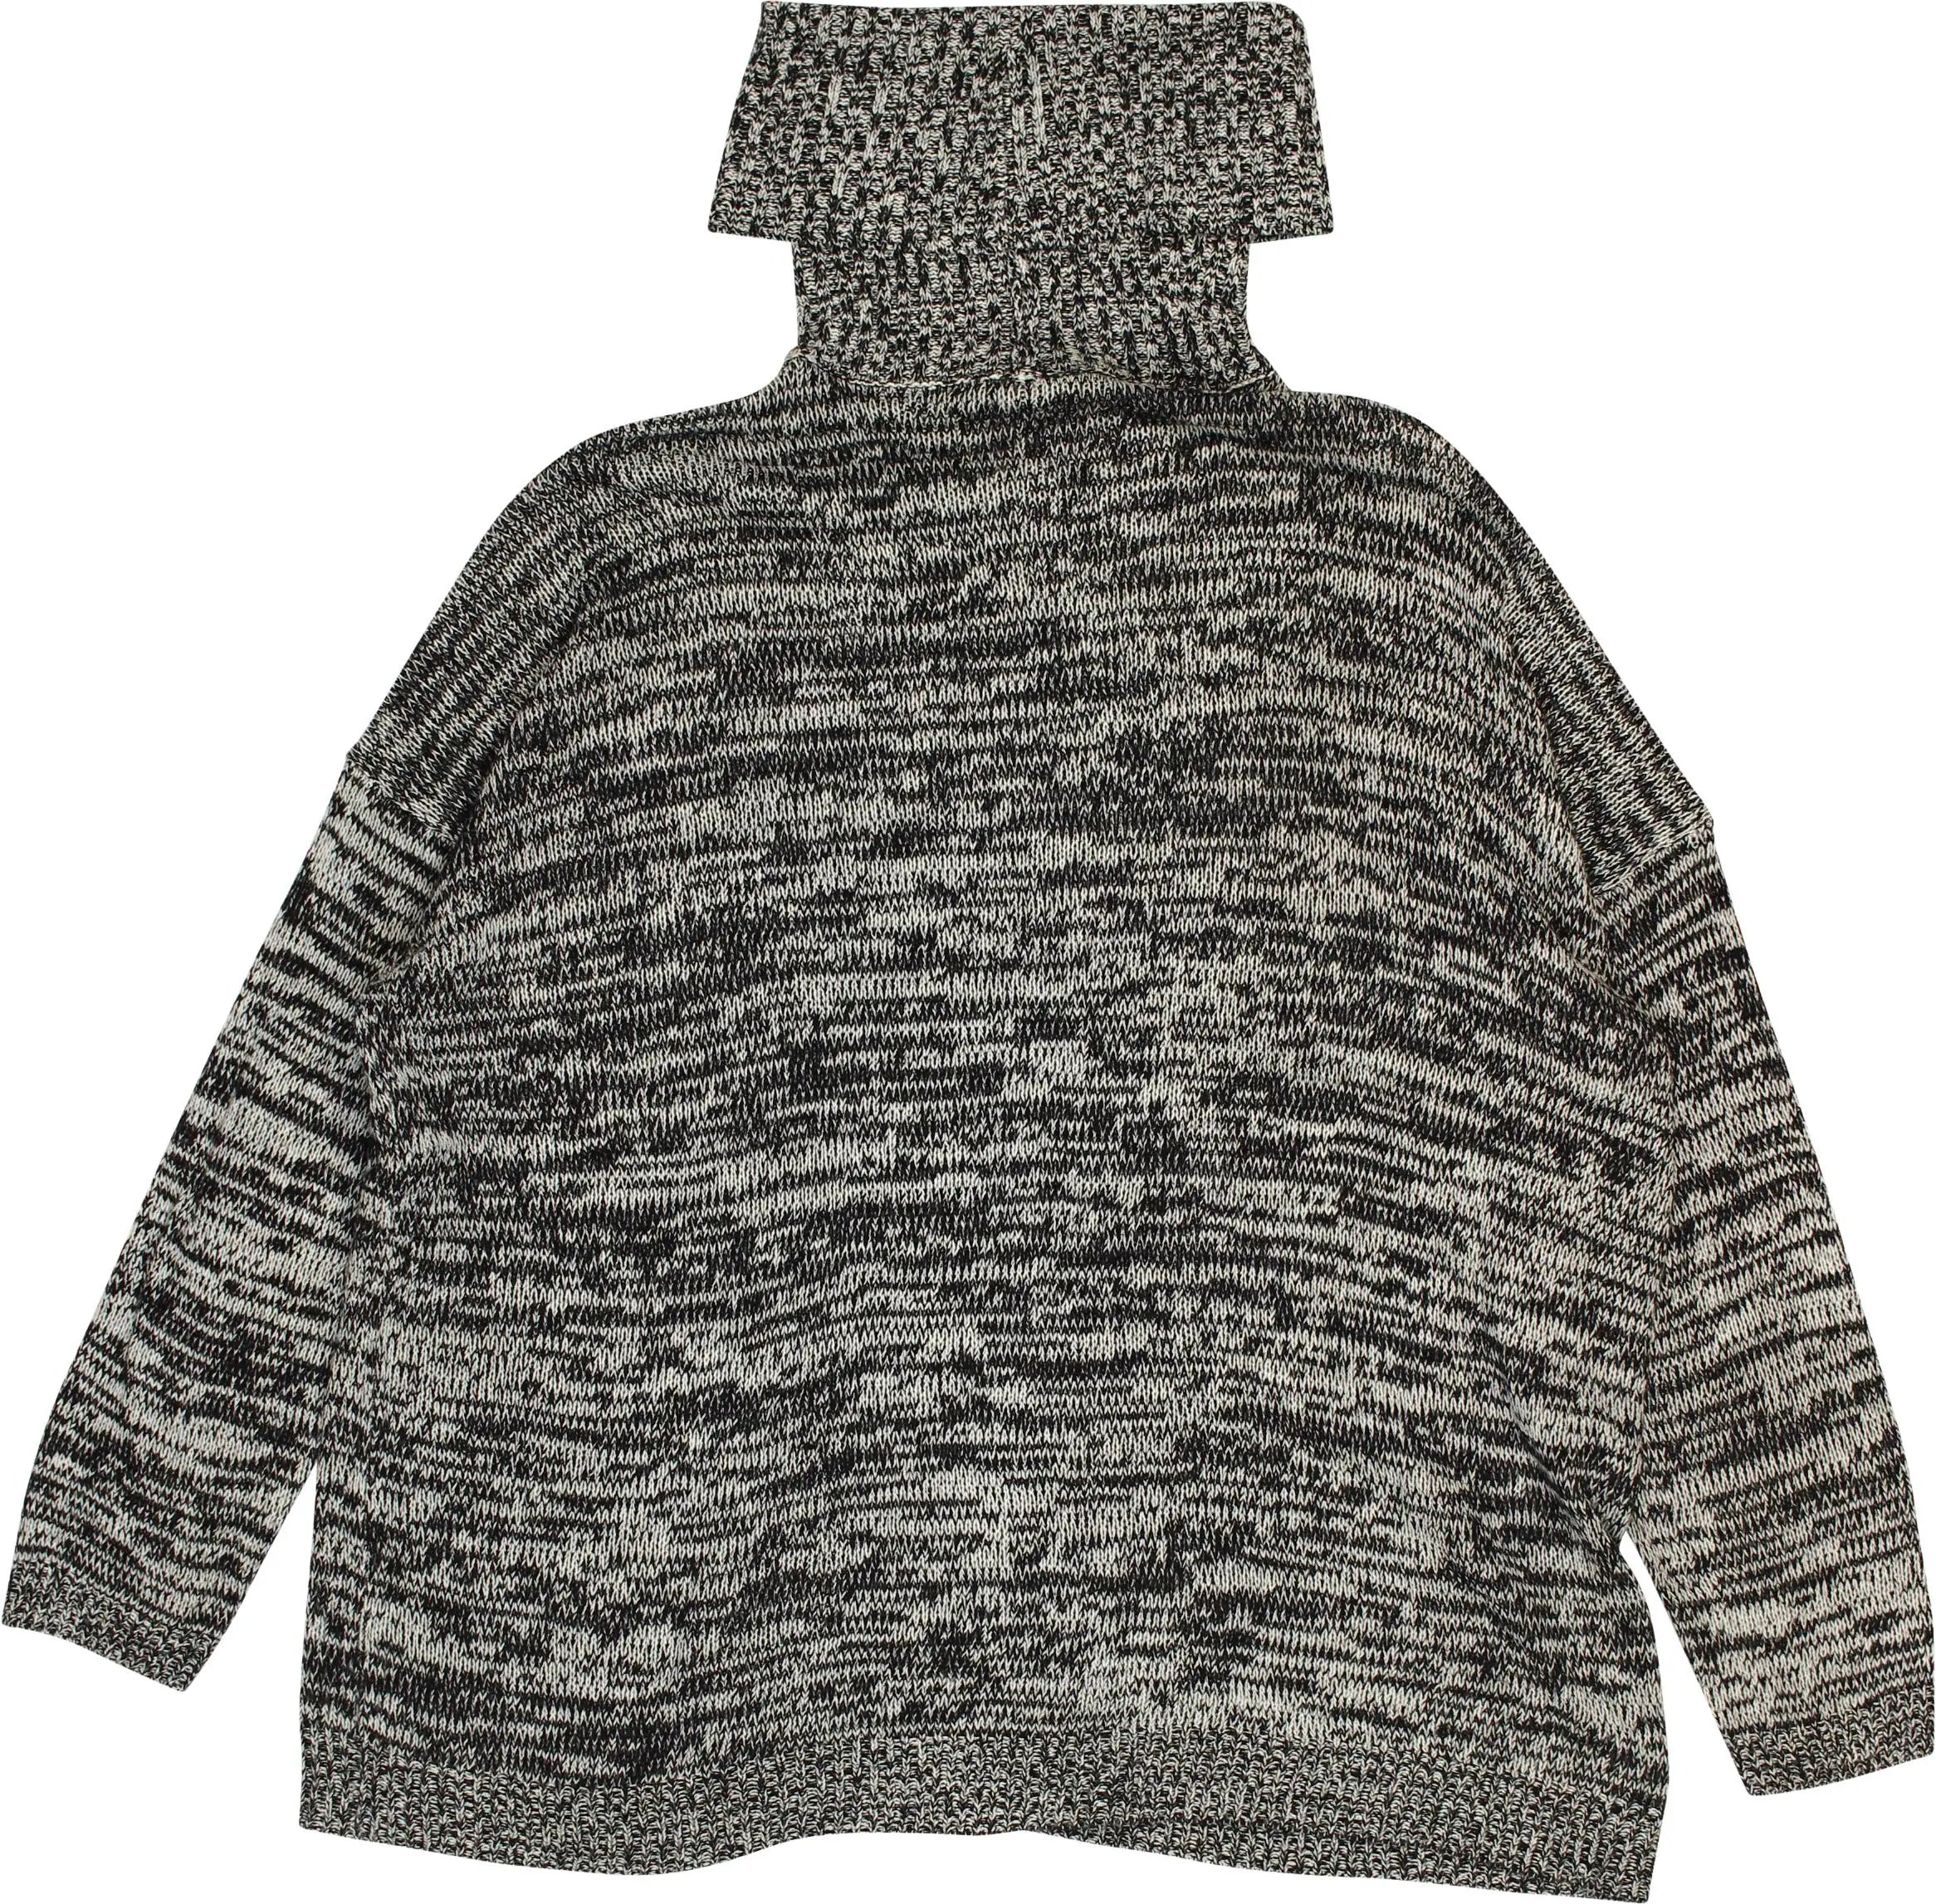 Vero Moda - Grey Knitted Turtleneck Jumper- ThriftTale.com - Vintage and second handclothing